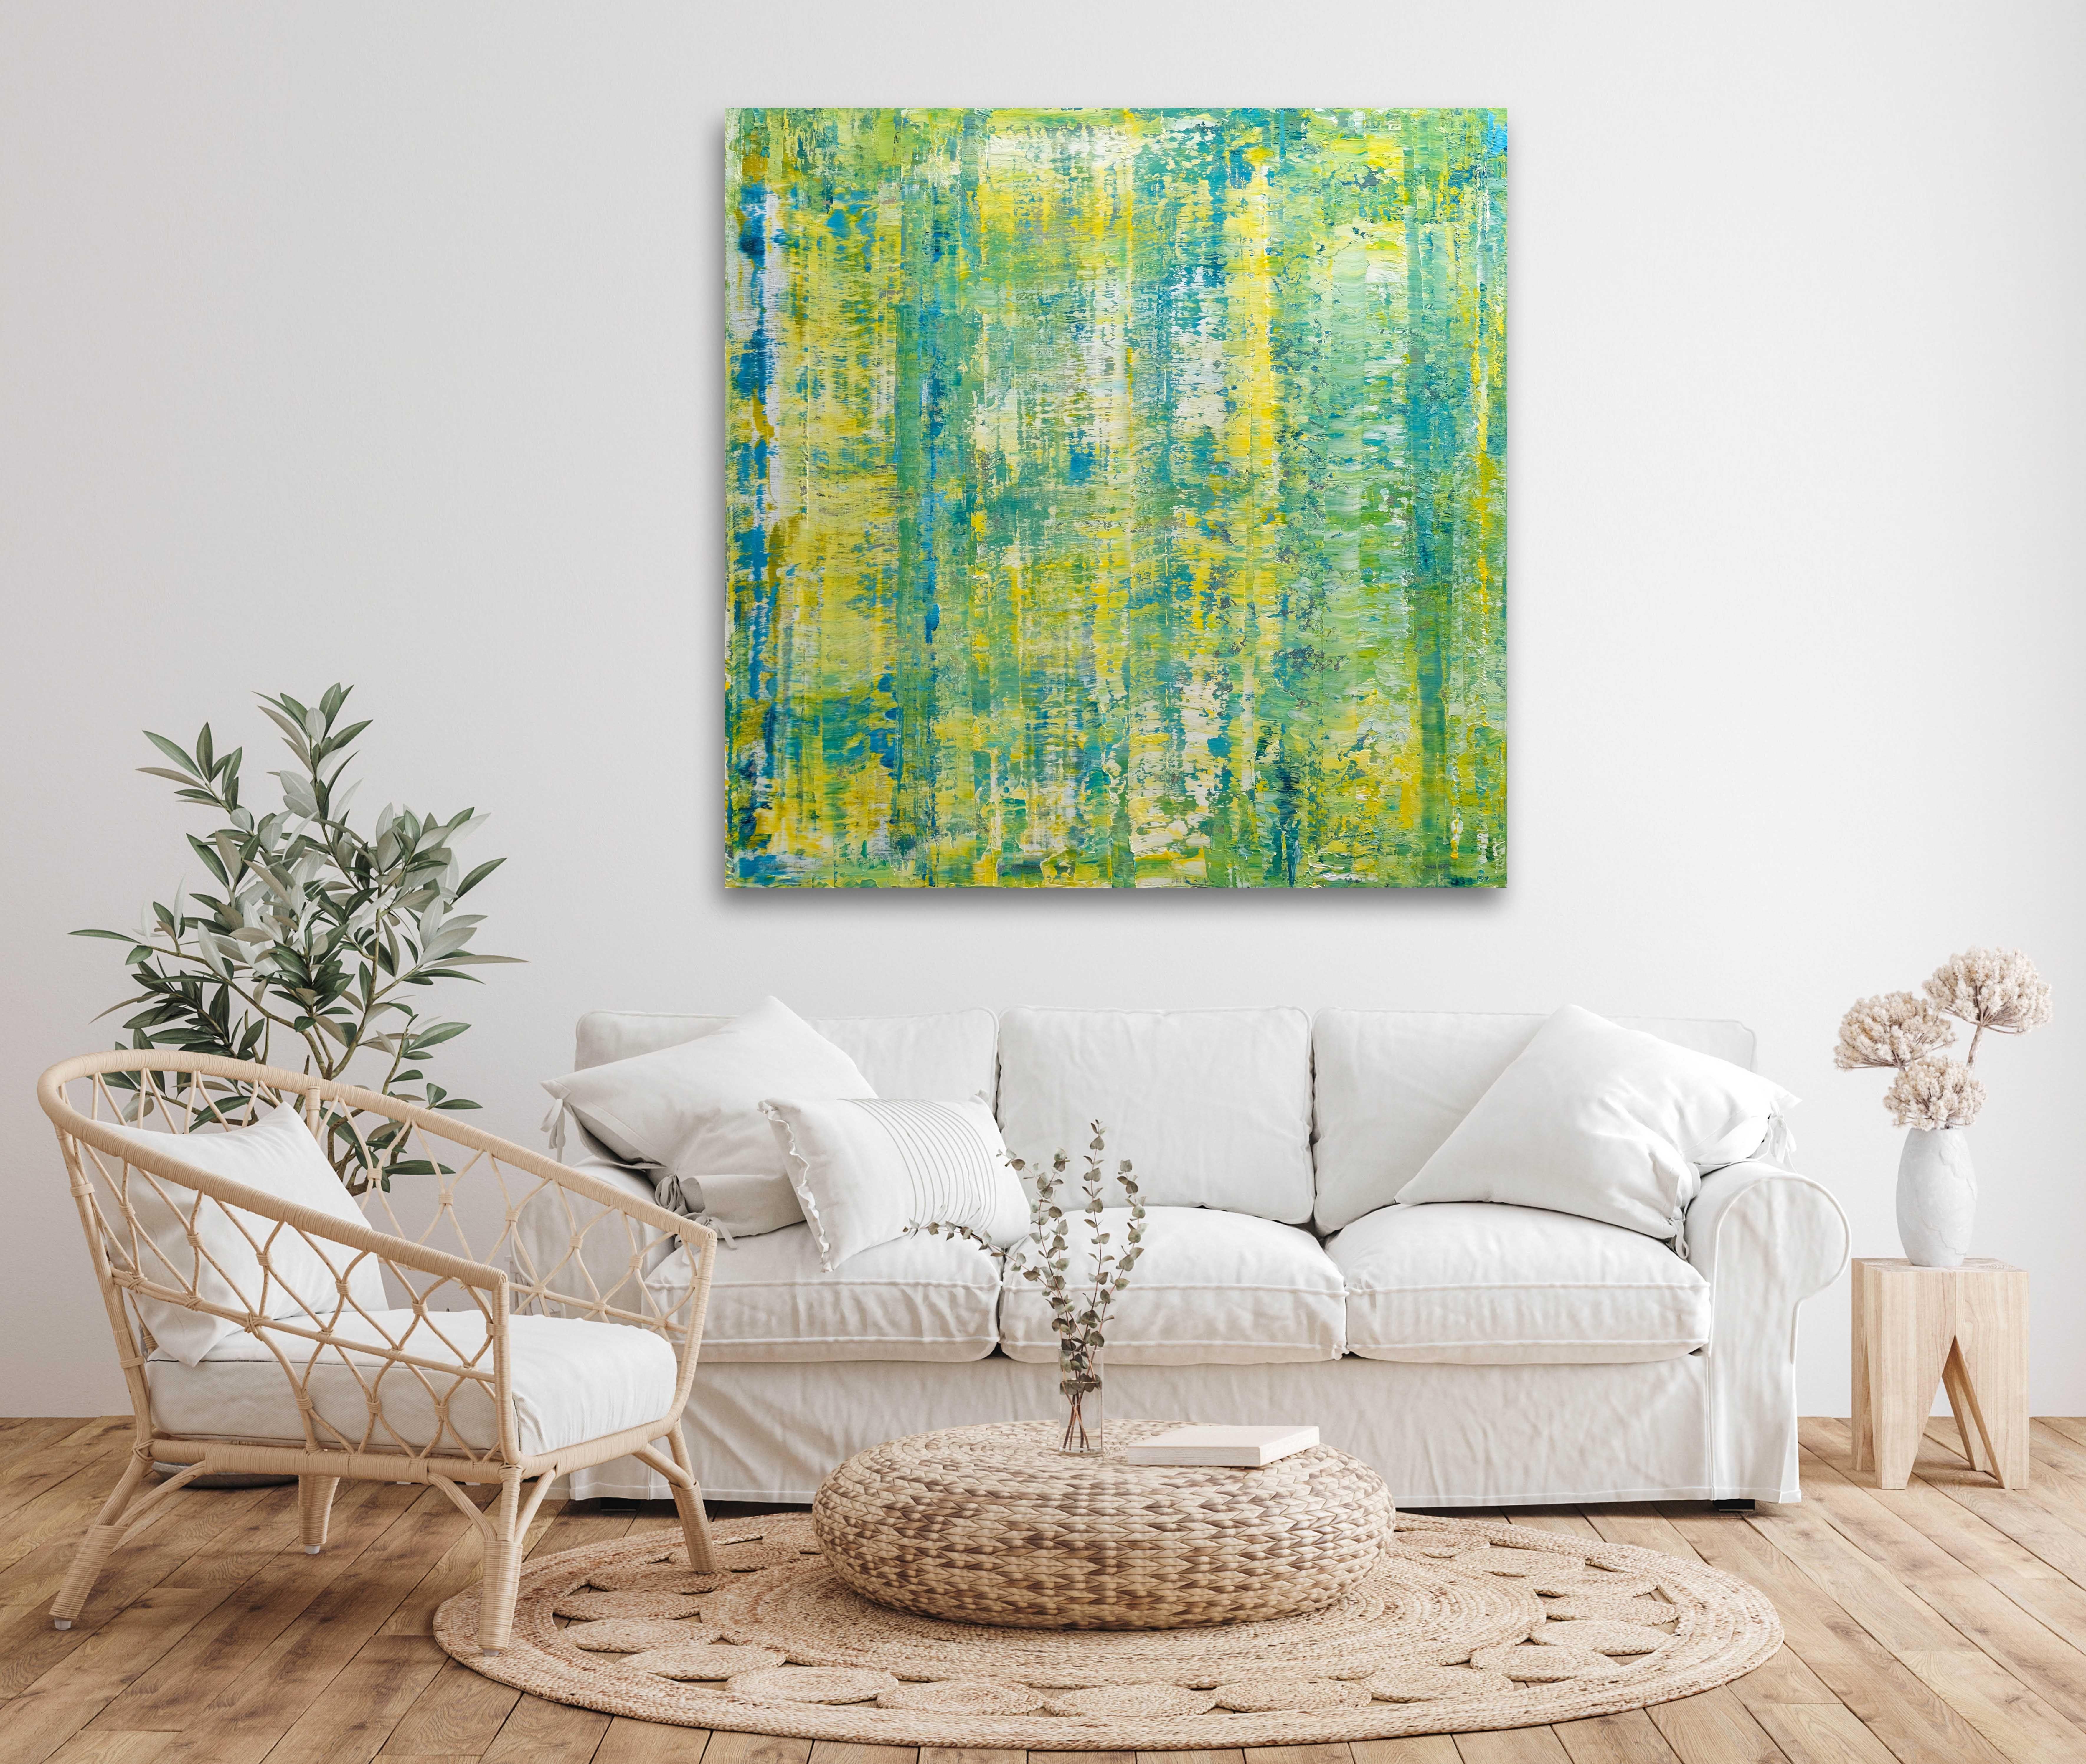 Large original abstract painting.  It was painted in multiple layers with palette knife and brushes.  The artwork is signed on the back and includes a Certificate of Authenticity.  The painting is done on stretched canvas using top quality acrylic